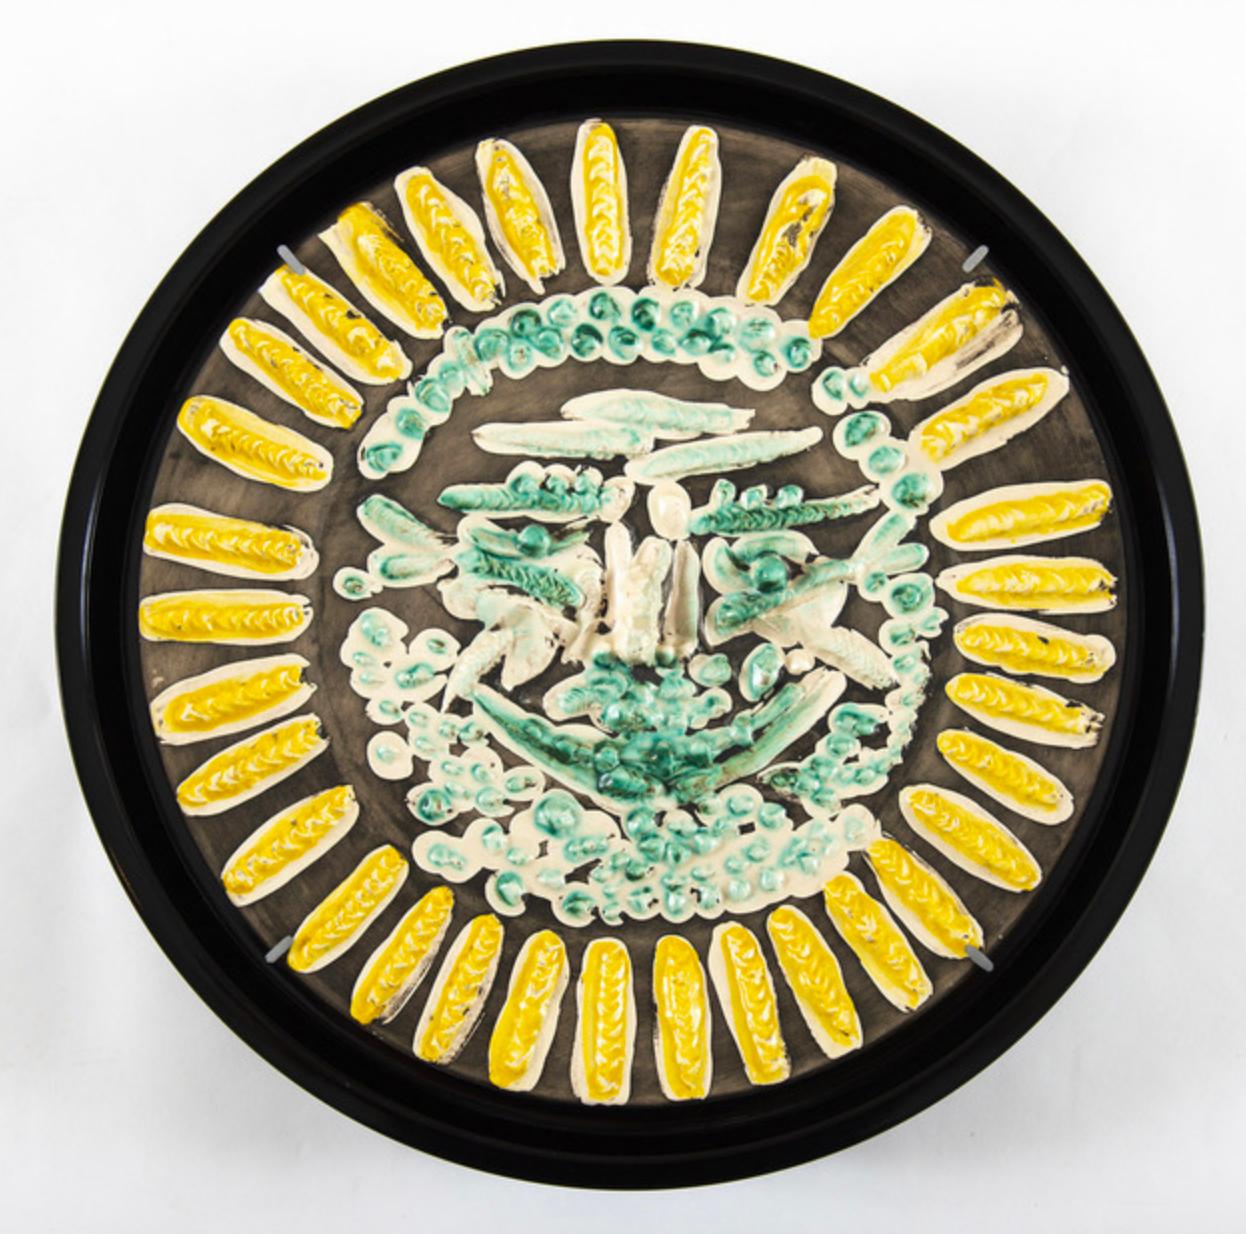 Visage tourmenté, Pablo Picasso, Ceramic, Limited edition, 1950's, Madoura 

Ed. 100 pcs
1956
Rounded plate, earth white earthenware, decor with engobes under partial cover with brush, yellow, green, black patina.
D. 42 cm / D. 49 cm (with